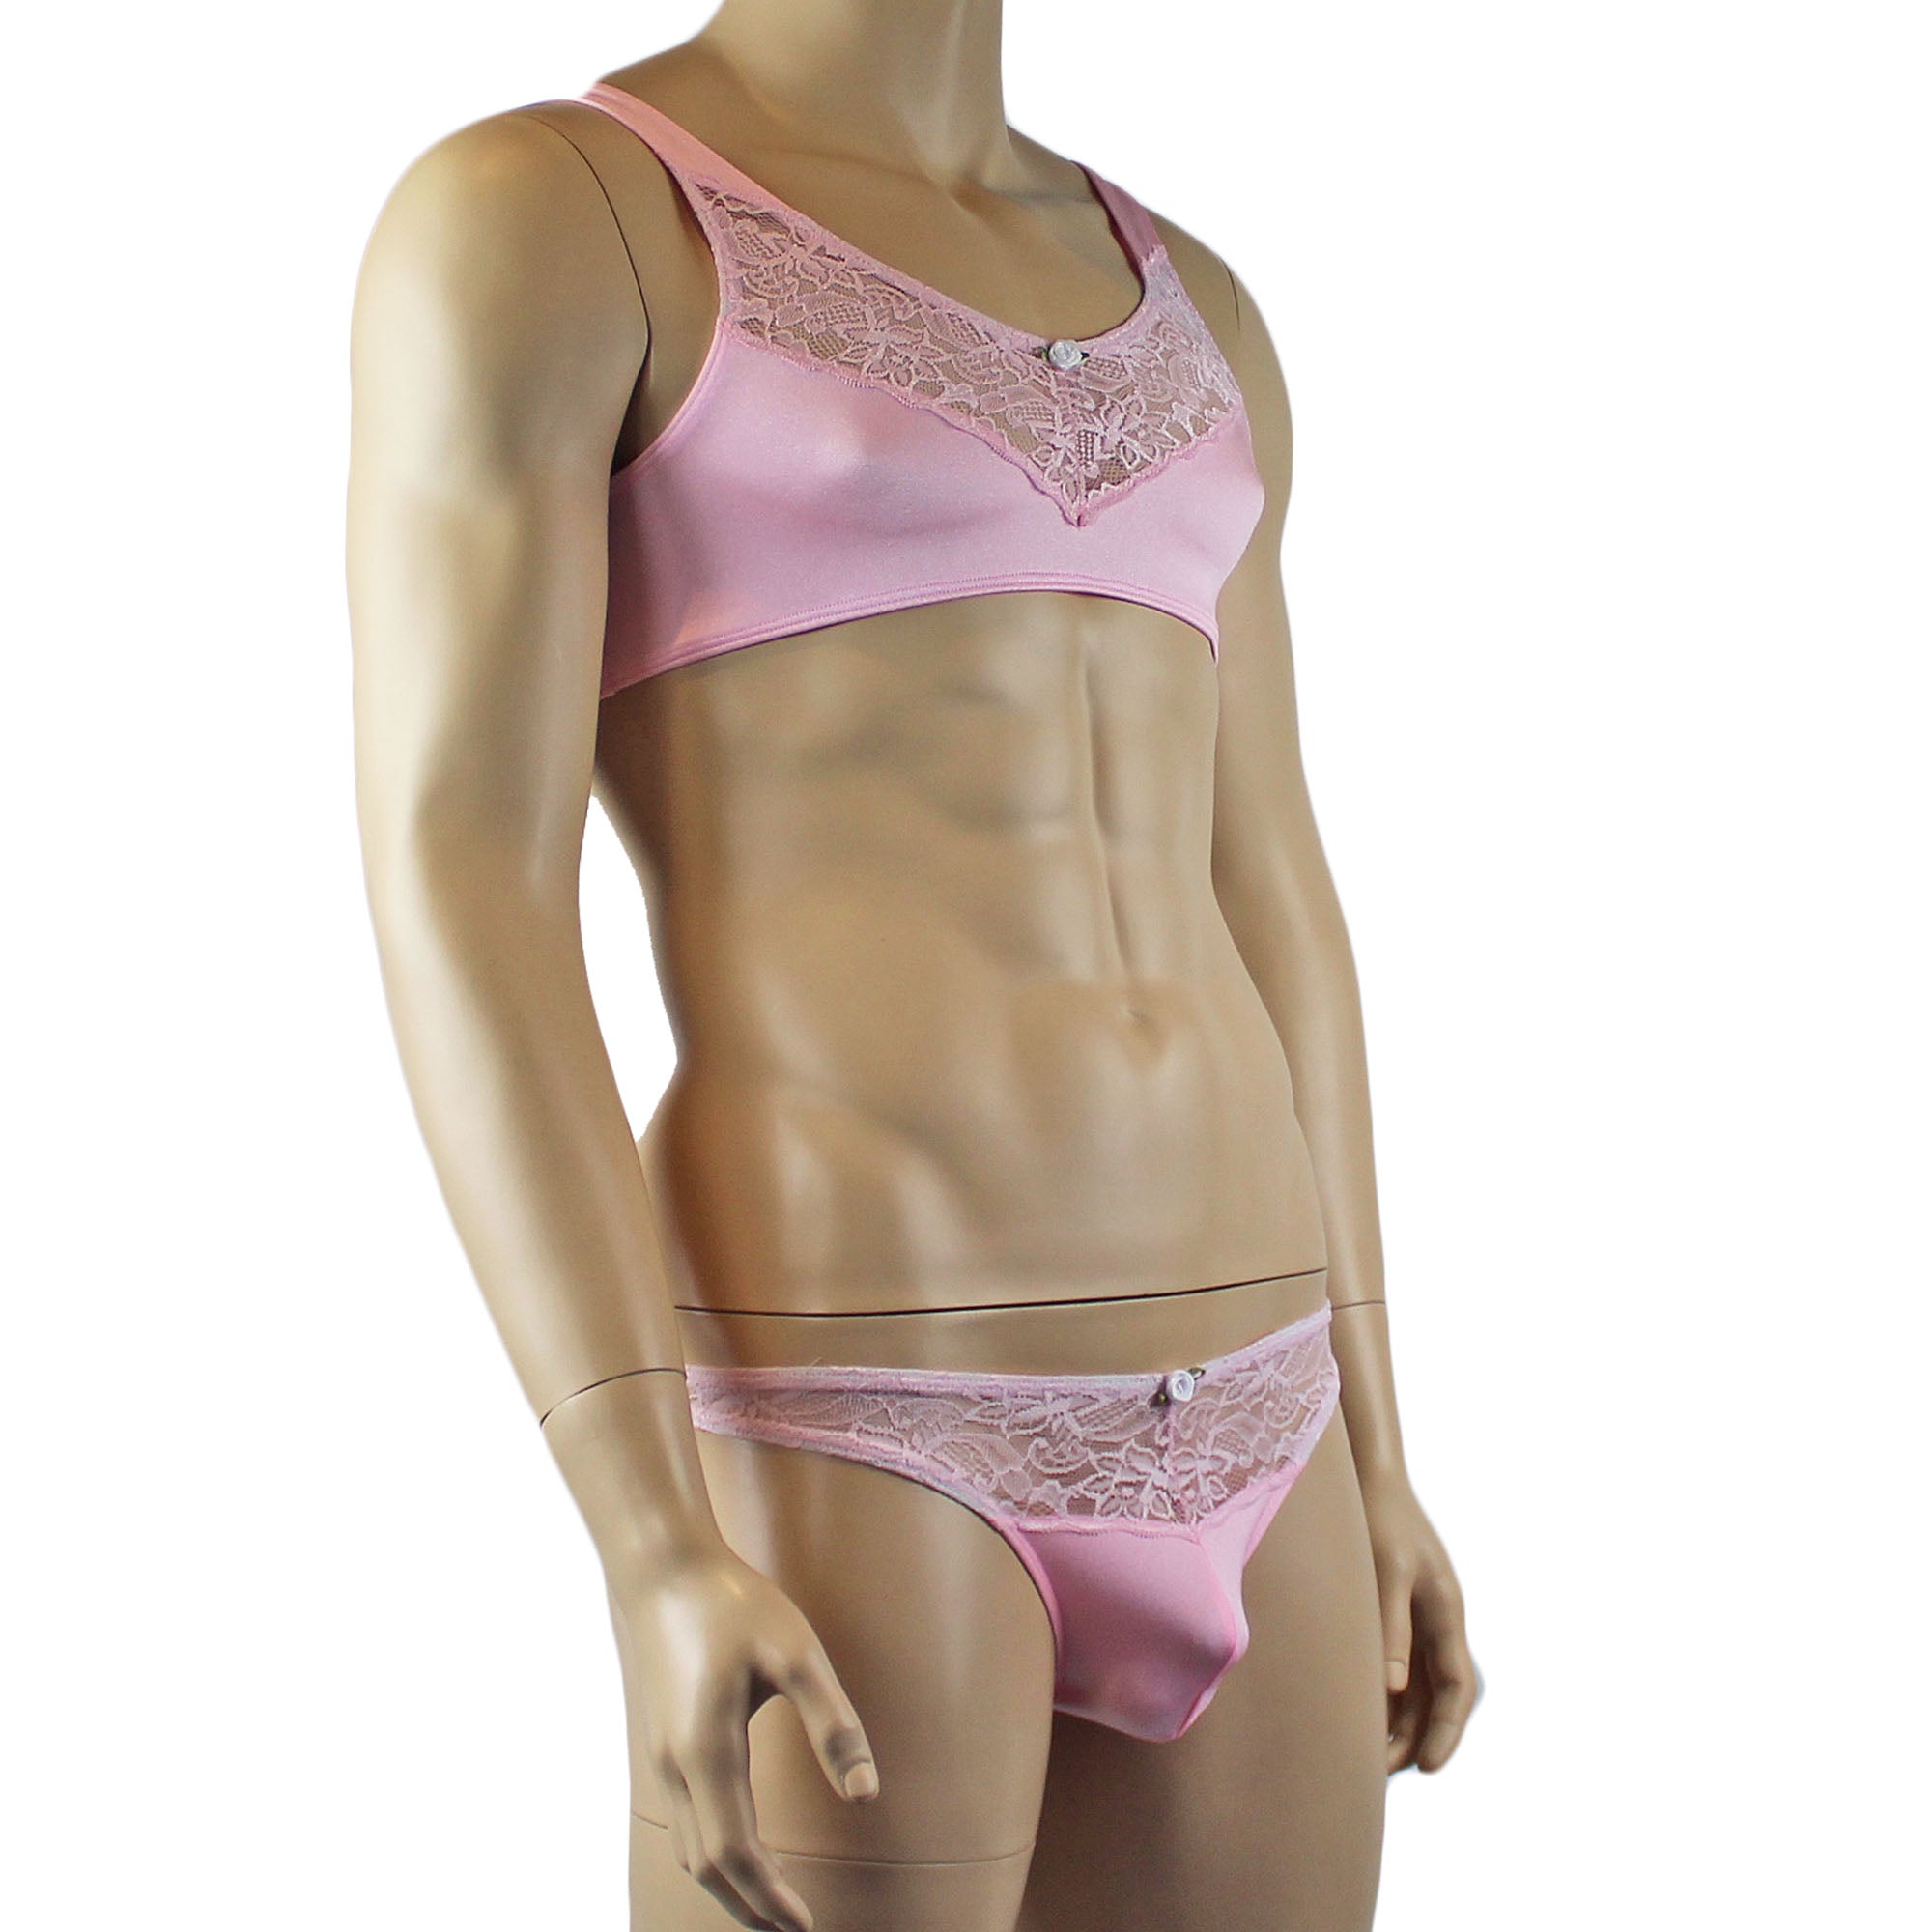 Male Penny Lingerie Bra Top with V Lace front and Capri Bikini Light Pink